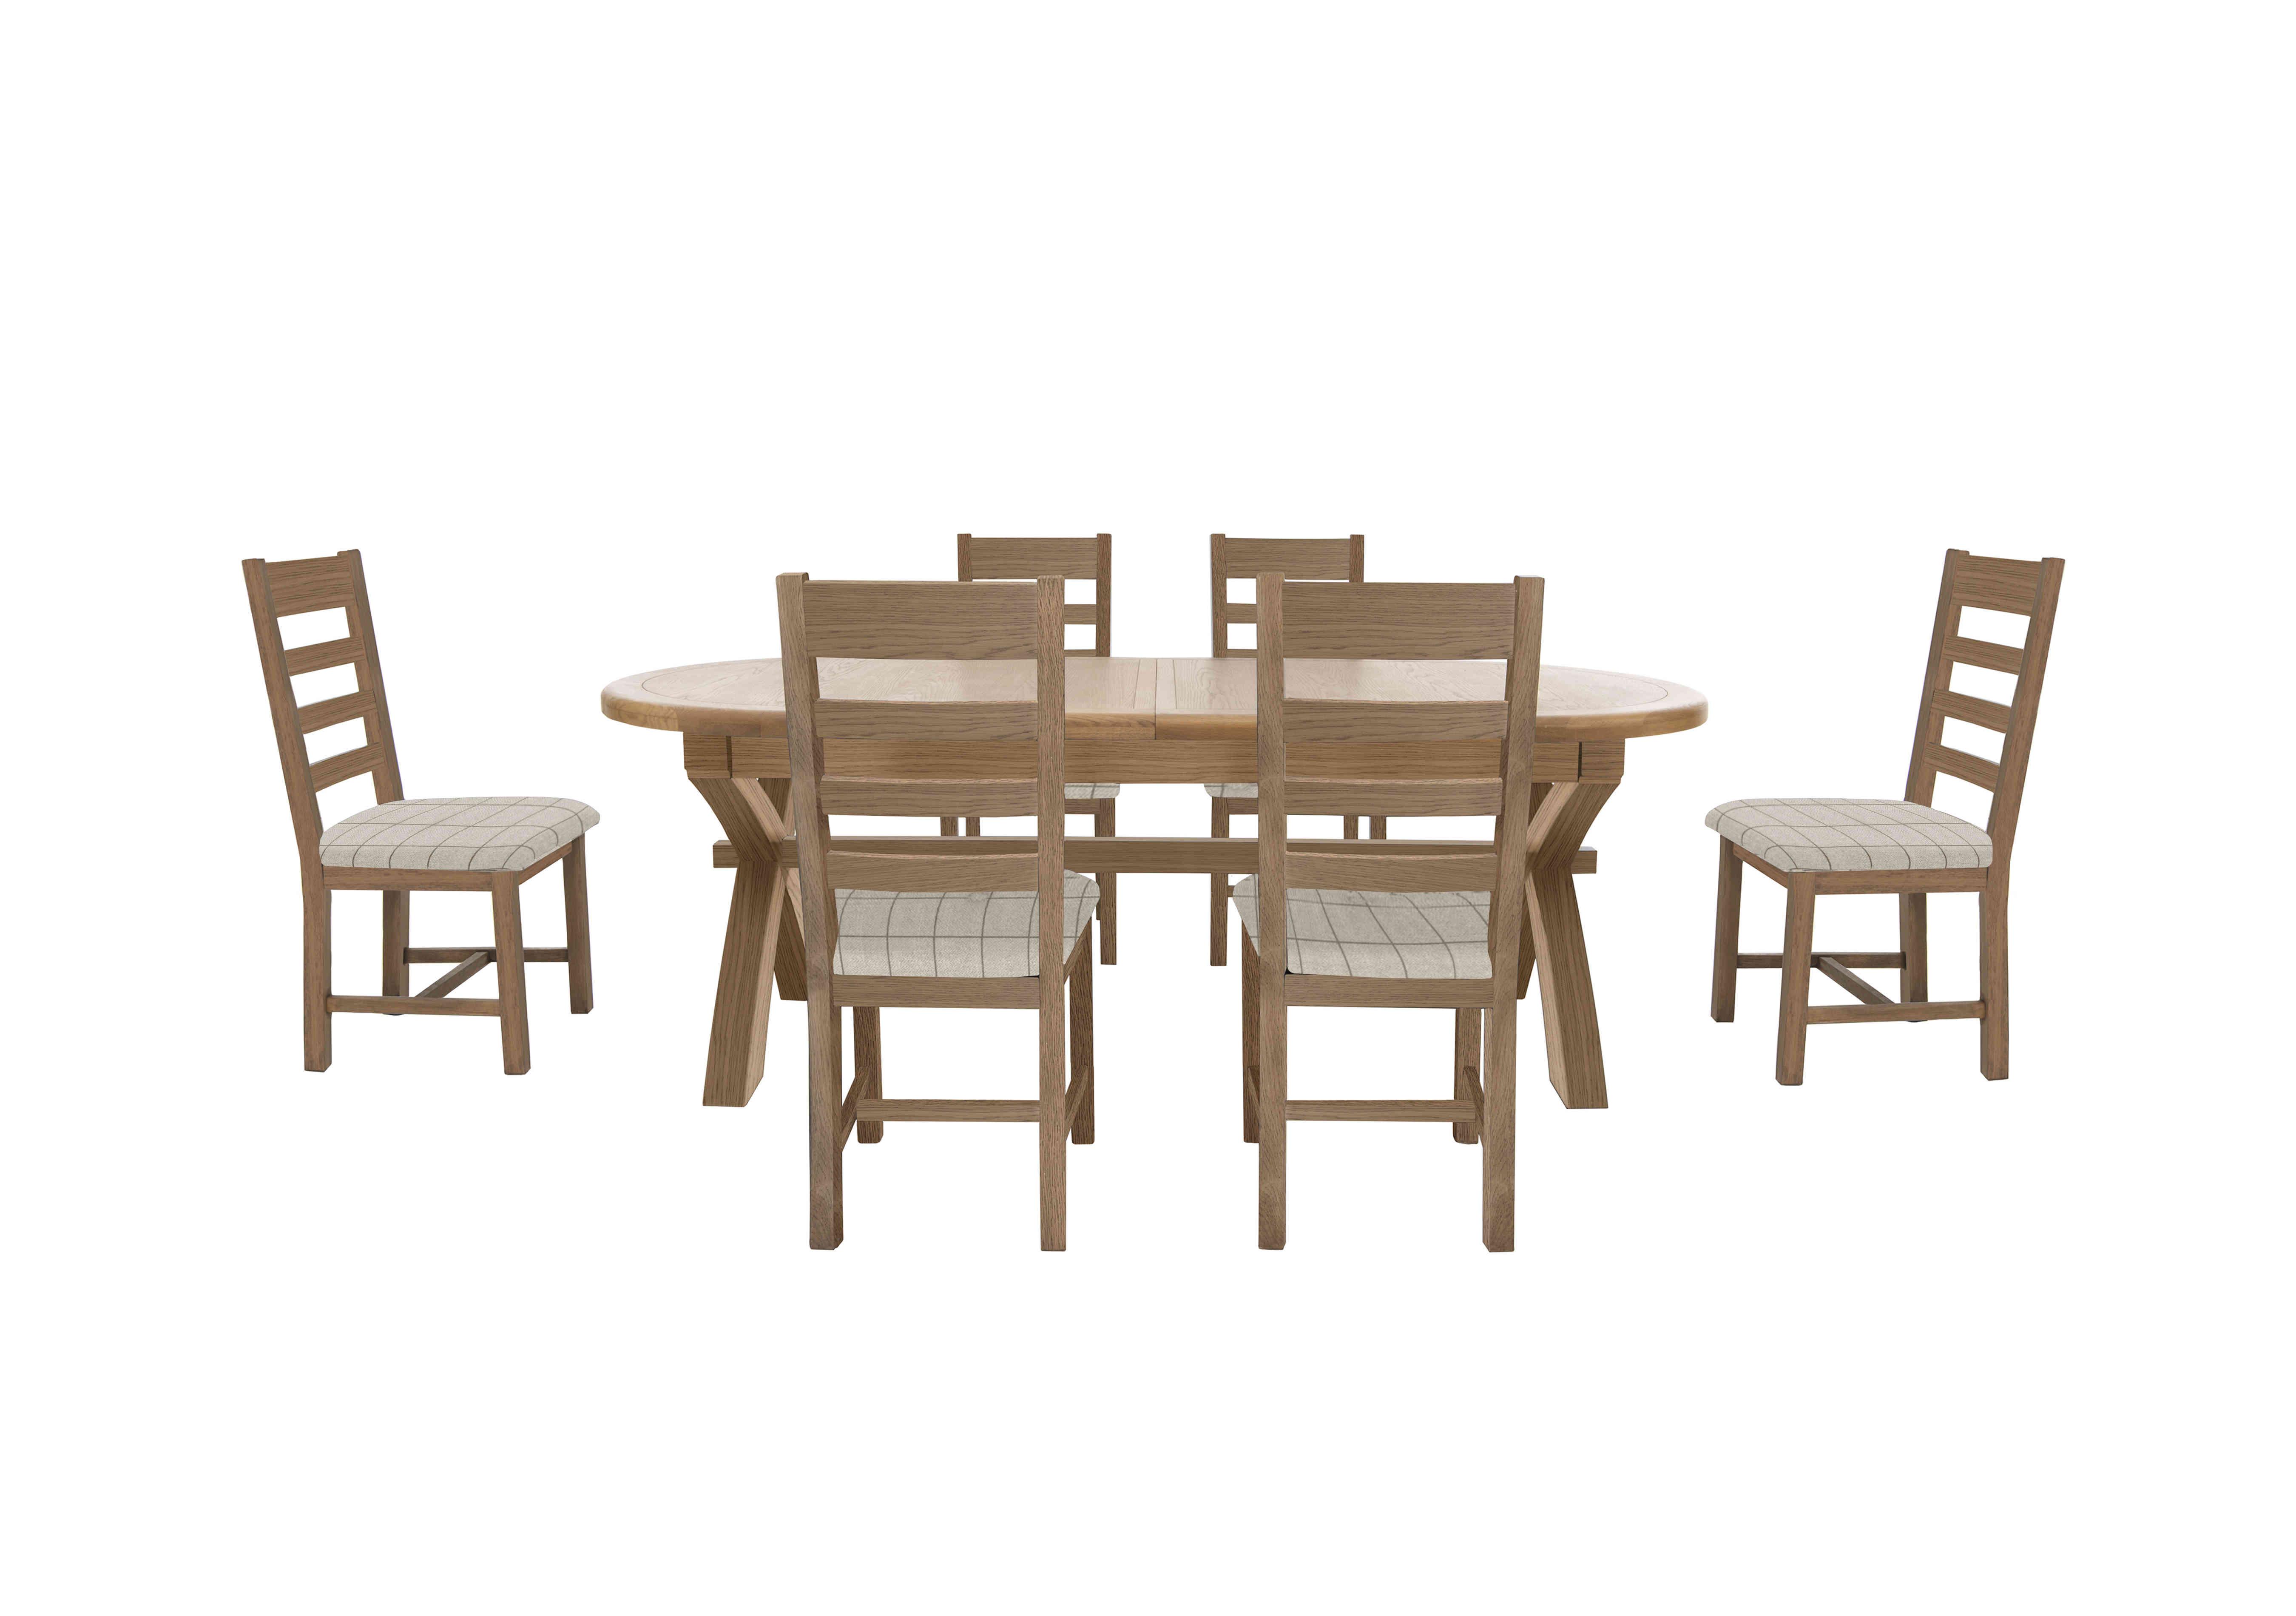 Hewitt Oval Extending Dining Table and 6 Slatted Dining Chairs in Oak / Natural Check Wool on Furniture Village